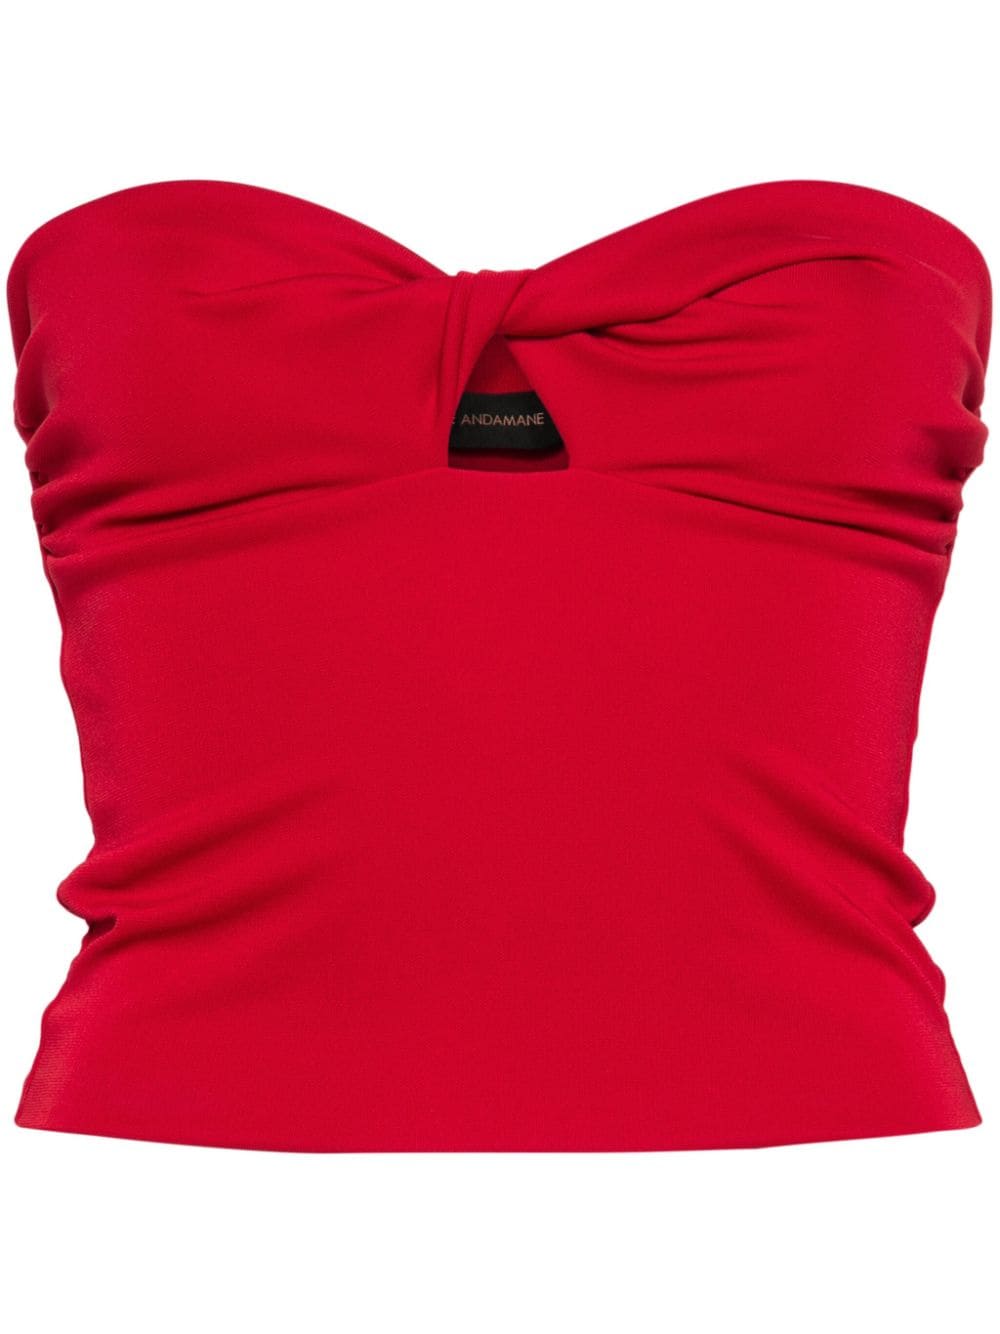 THE ANDAMANE LUCILLE STRAPLESS TOP